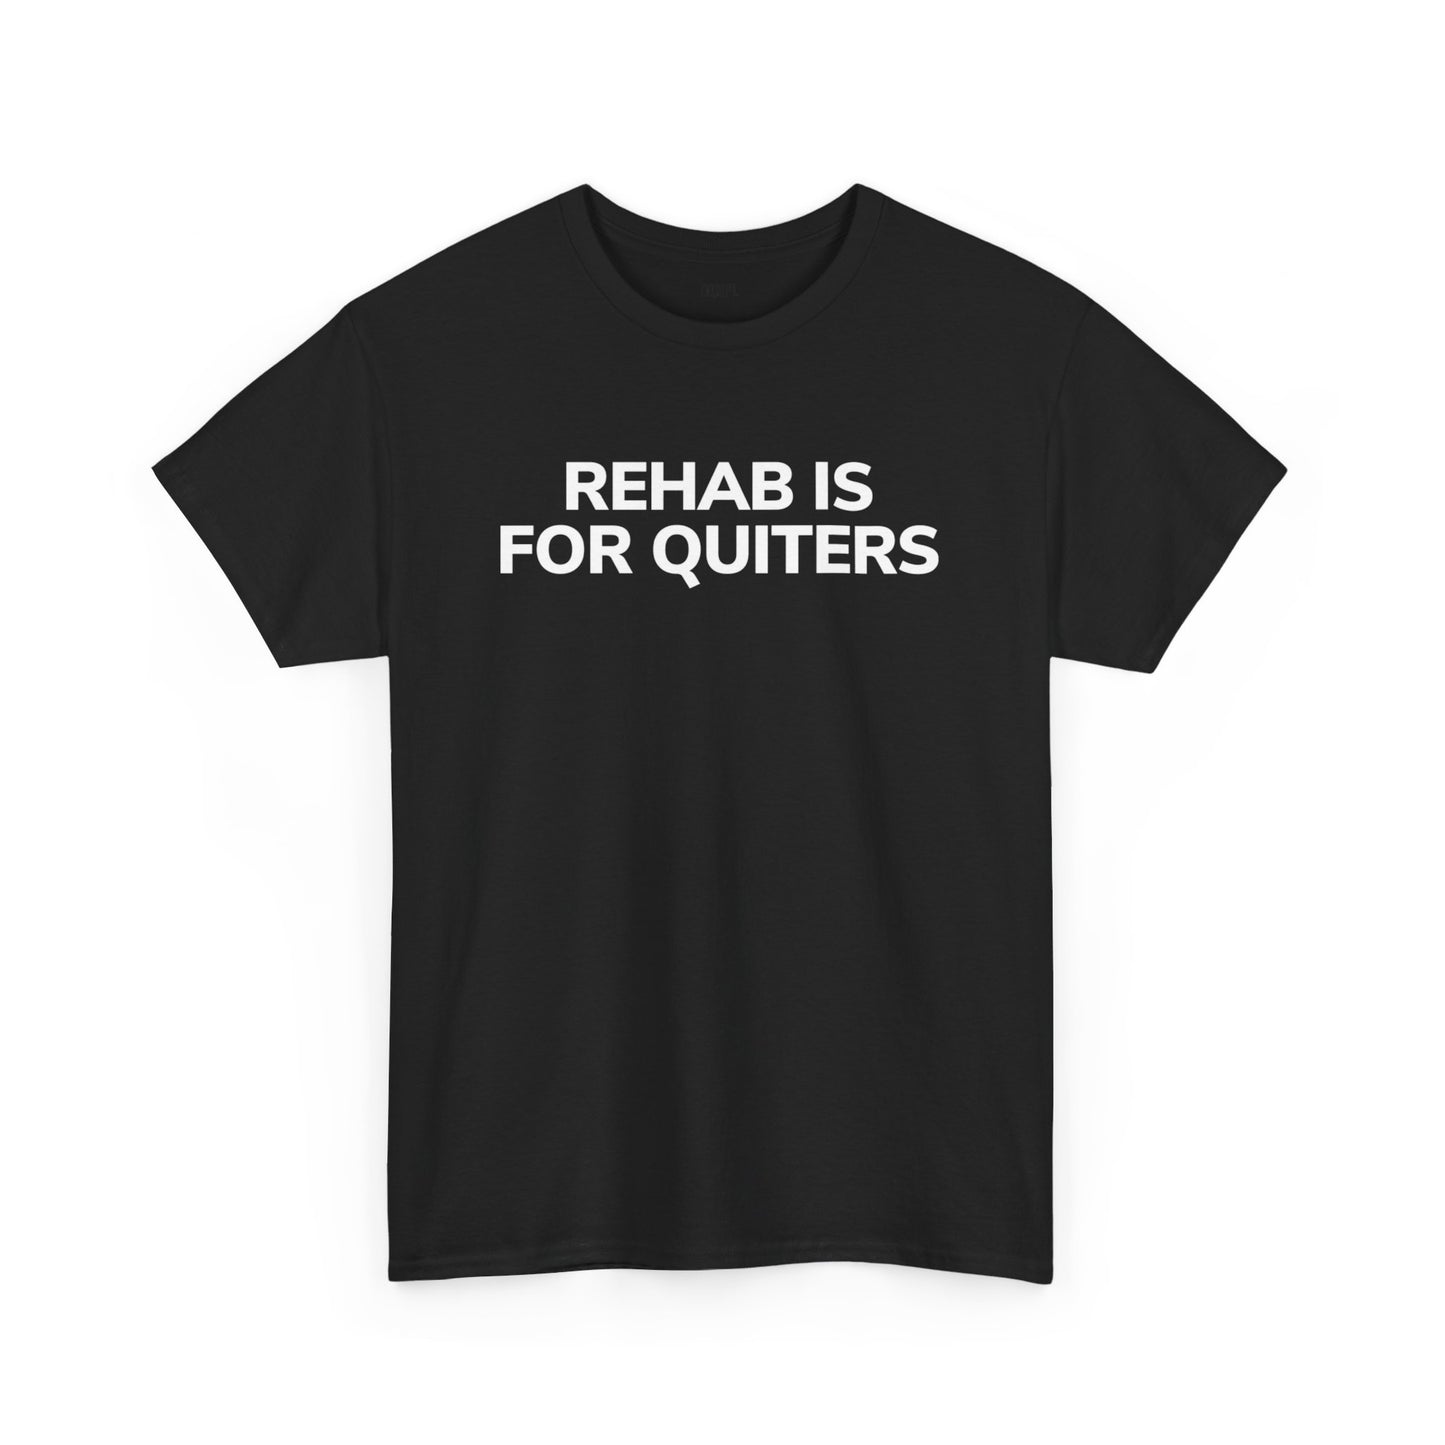 REHAB IS FOR QUITTERS (T - SHIRT)